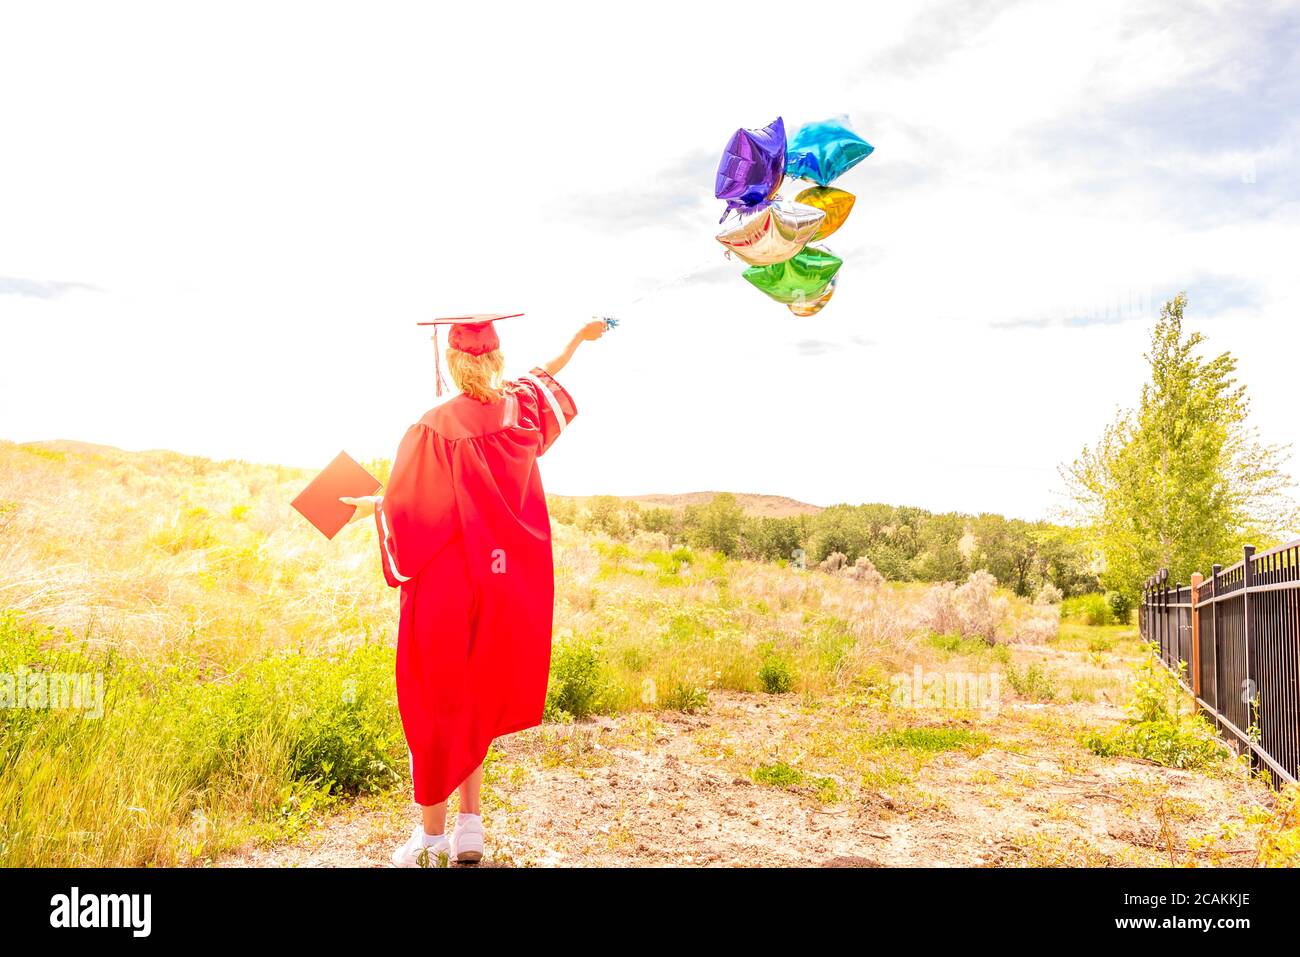 Young woman celebrating high school graduation, holding balloons and diploma. Stock Photo